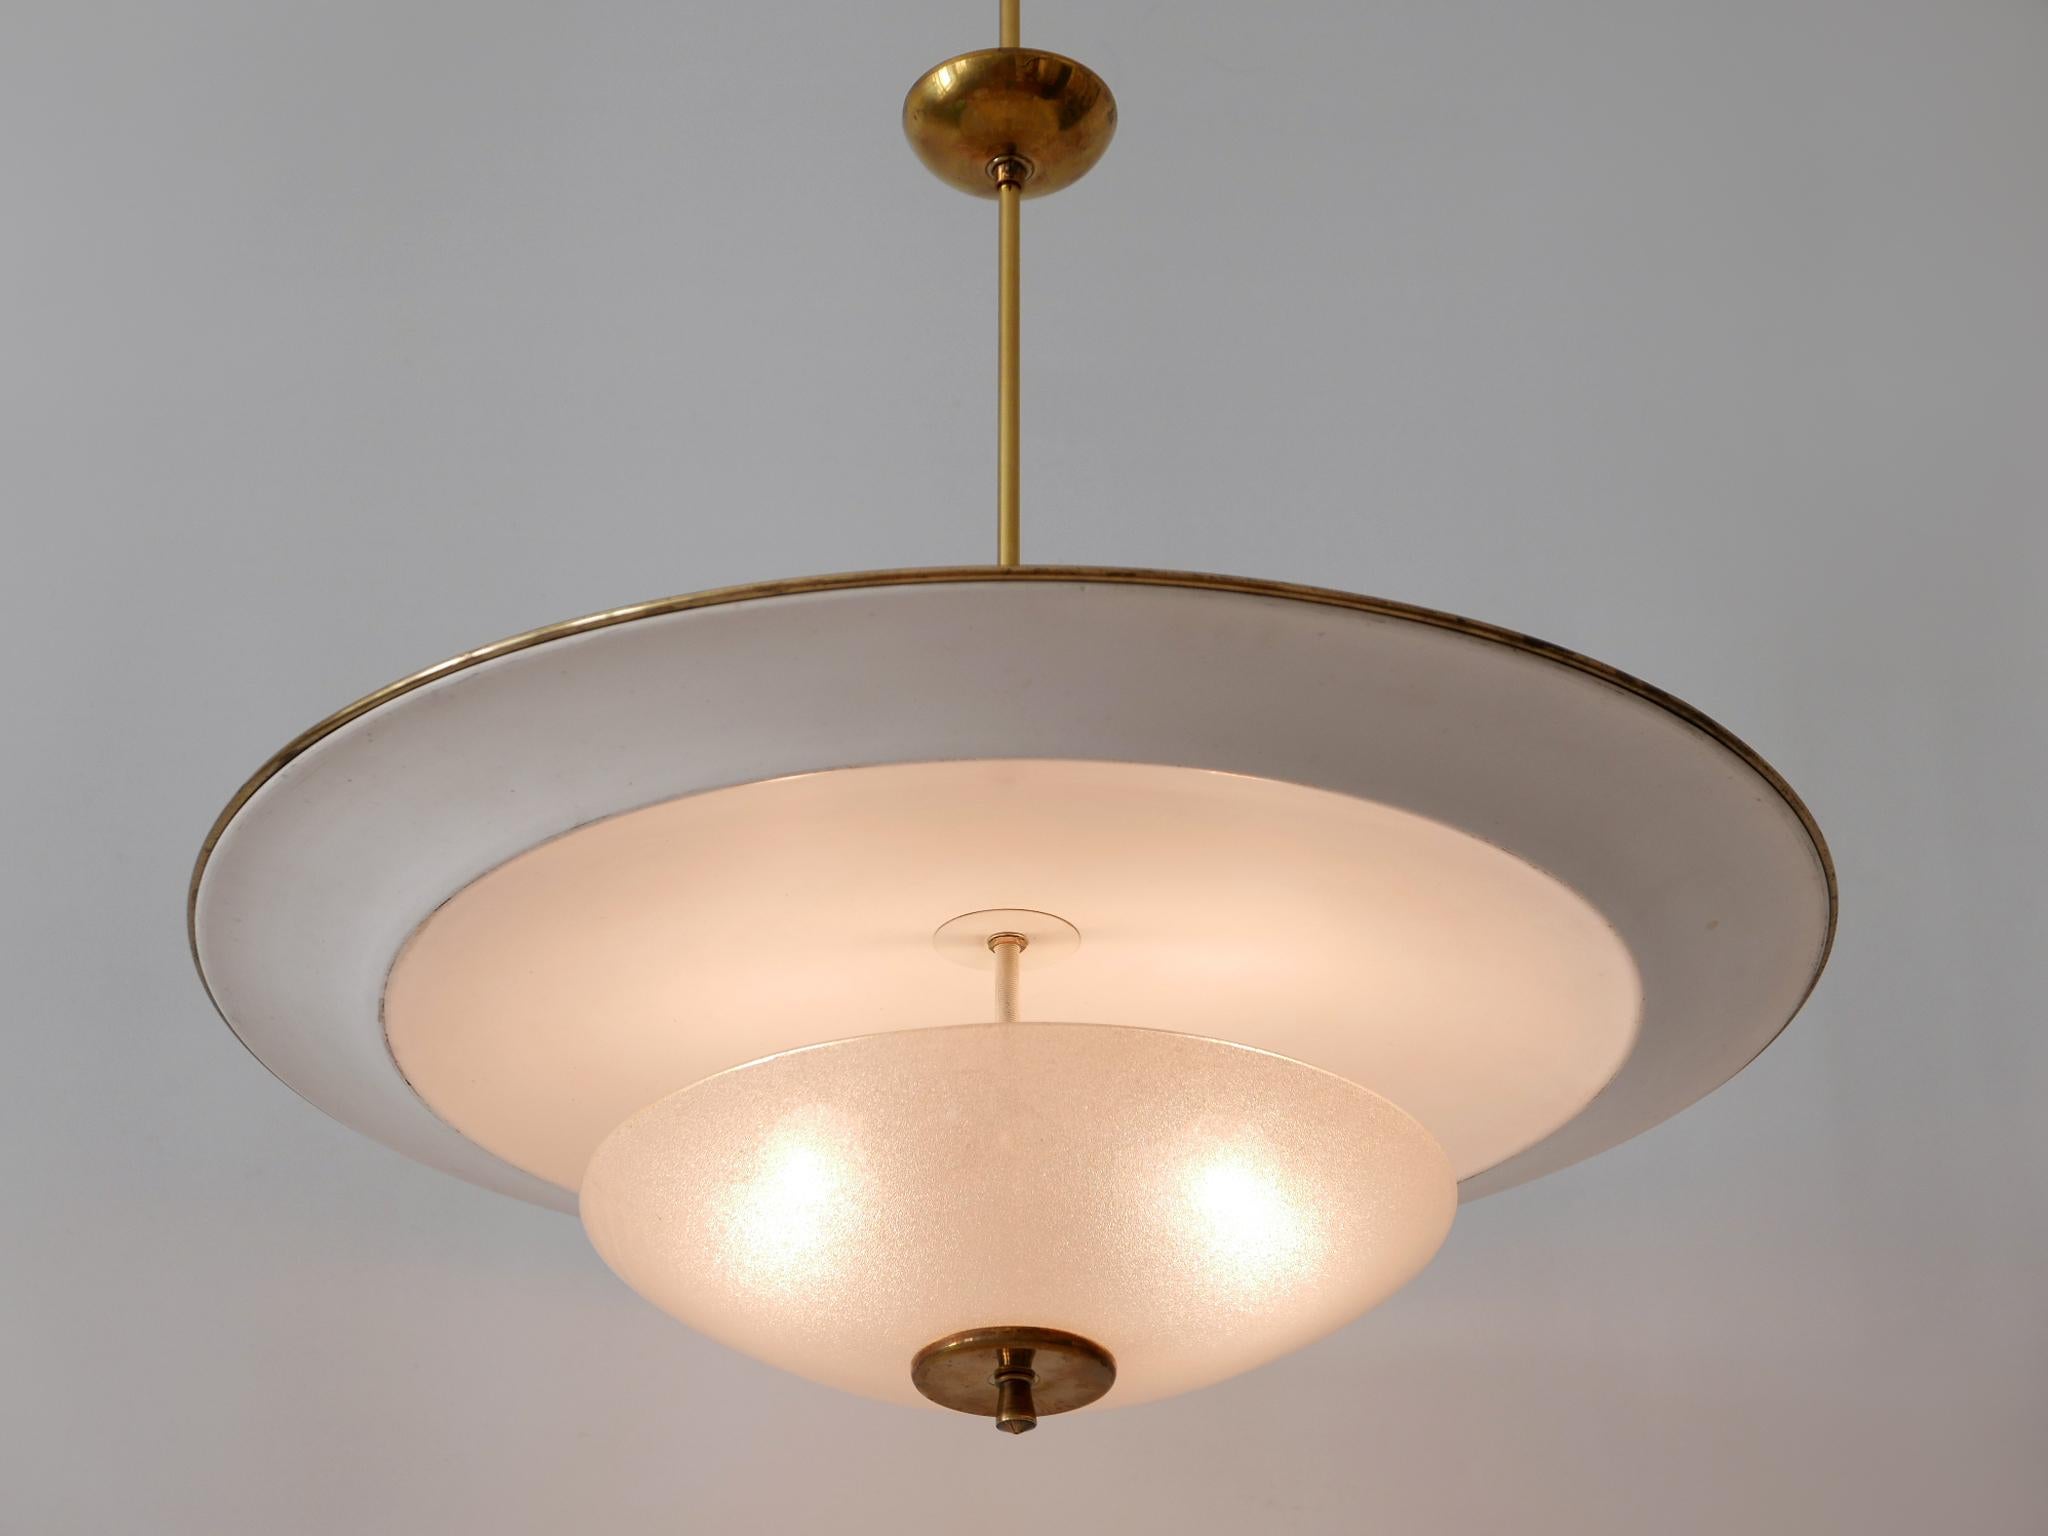 Large Mid-Century Modern 'Ufo' Ceiling Light or Pendant Lamp Germany 1950s № 2 For Sale 9